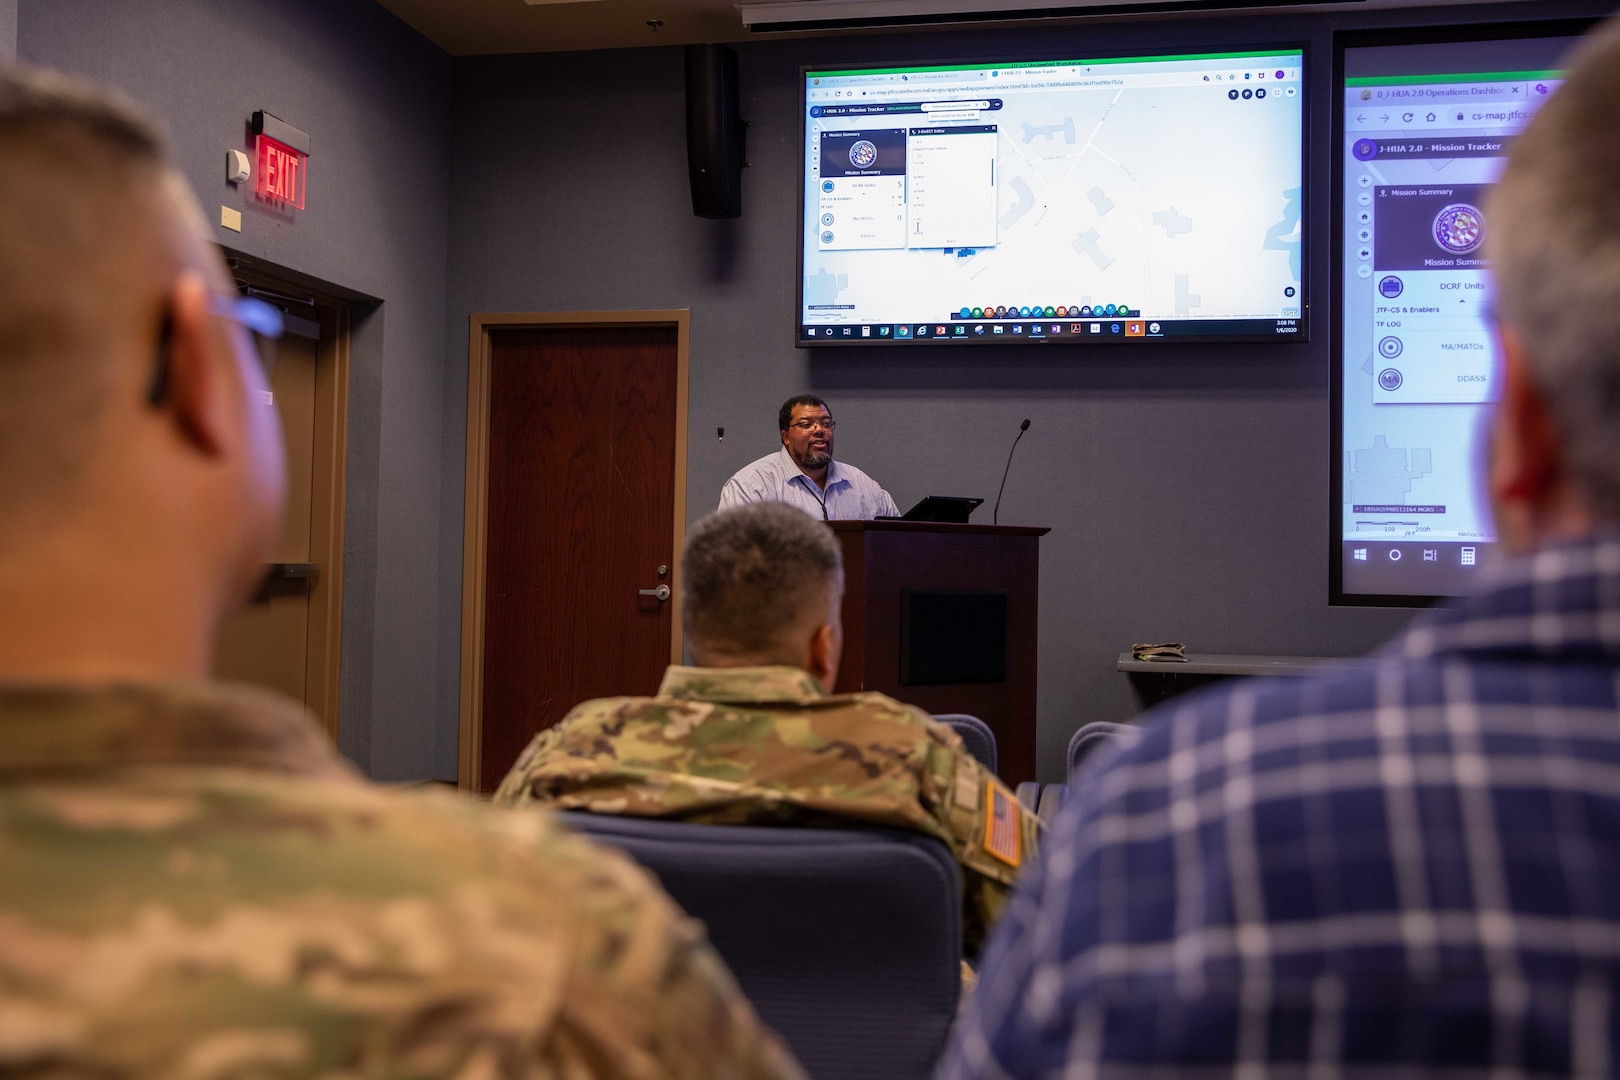 Harold Richardson, Joint Task Force Civil Support (JTF-CS) geographic information system coordinator, briefs JTF-CS and Defense Chemical, Biological, Radiological and Nuclear (CBRN) Response Force (DCRF) personnel during the command’s Exercise Sudden Response 2020 (SR20) staff academics conference, held at the command’s headquarters, Jan. 6-8. During the event, JTF-CS and DCRF personnel focused on major movements and friction points that would be encountered during the deployment and operation phases of SR20. (Official DoD photo by Mass Communication Specialist 3rd Class Michael Redd/RELEASED)